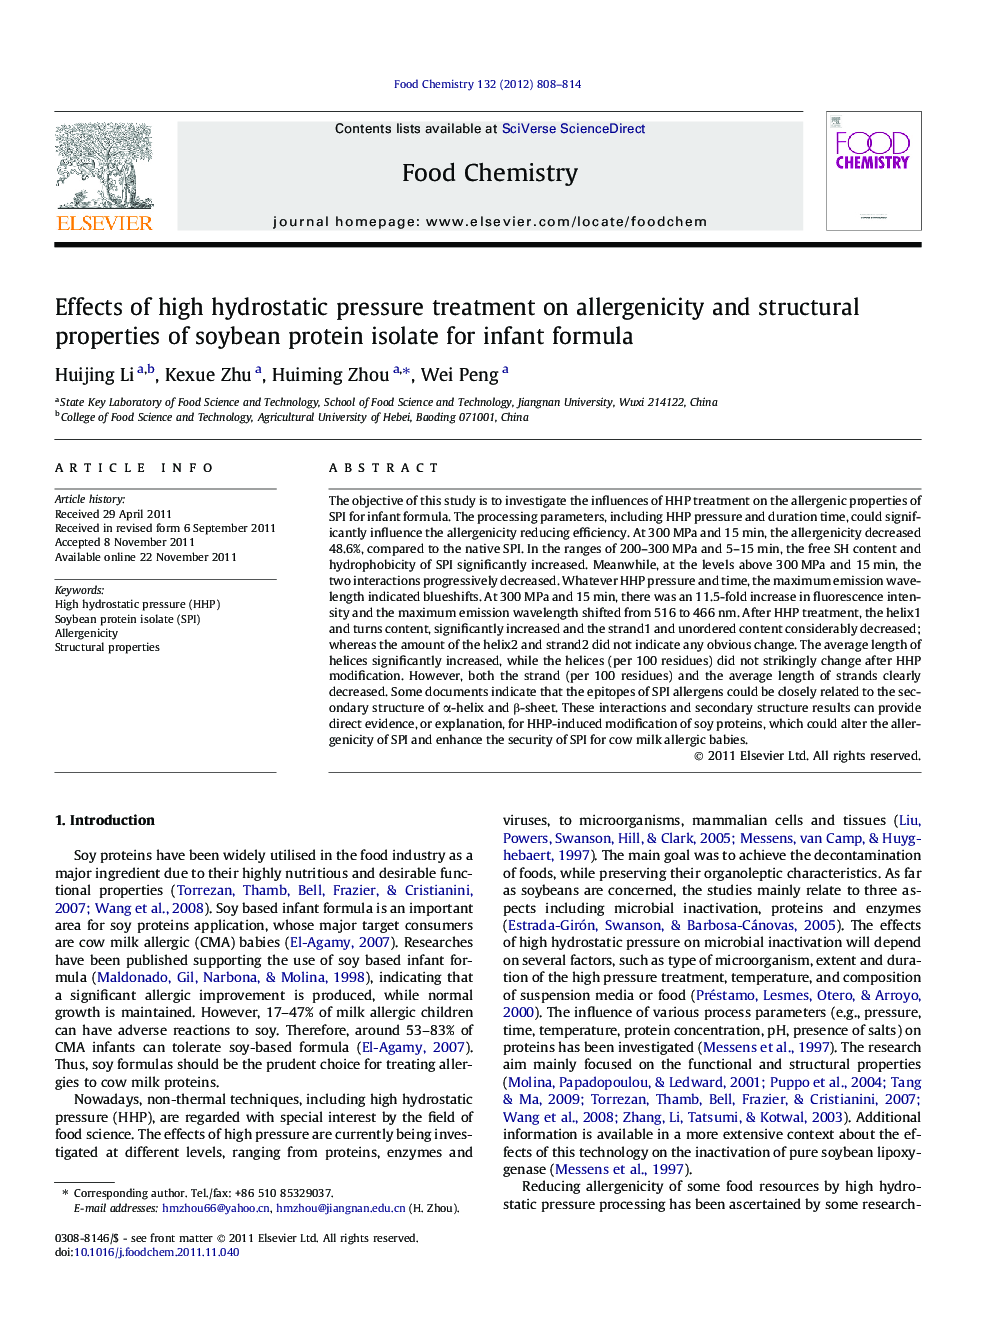 Effects of high hydrostatic pressure treatment on allergenicity and structural properties of soybean protein isolate for infant formula